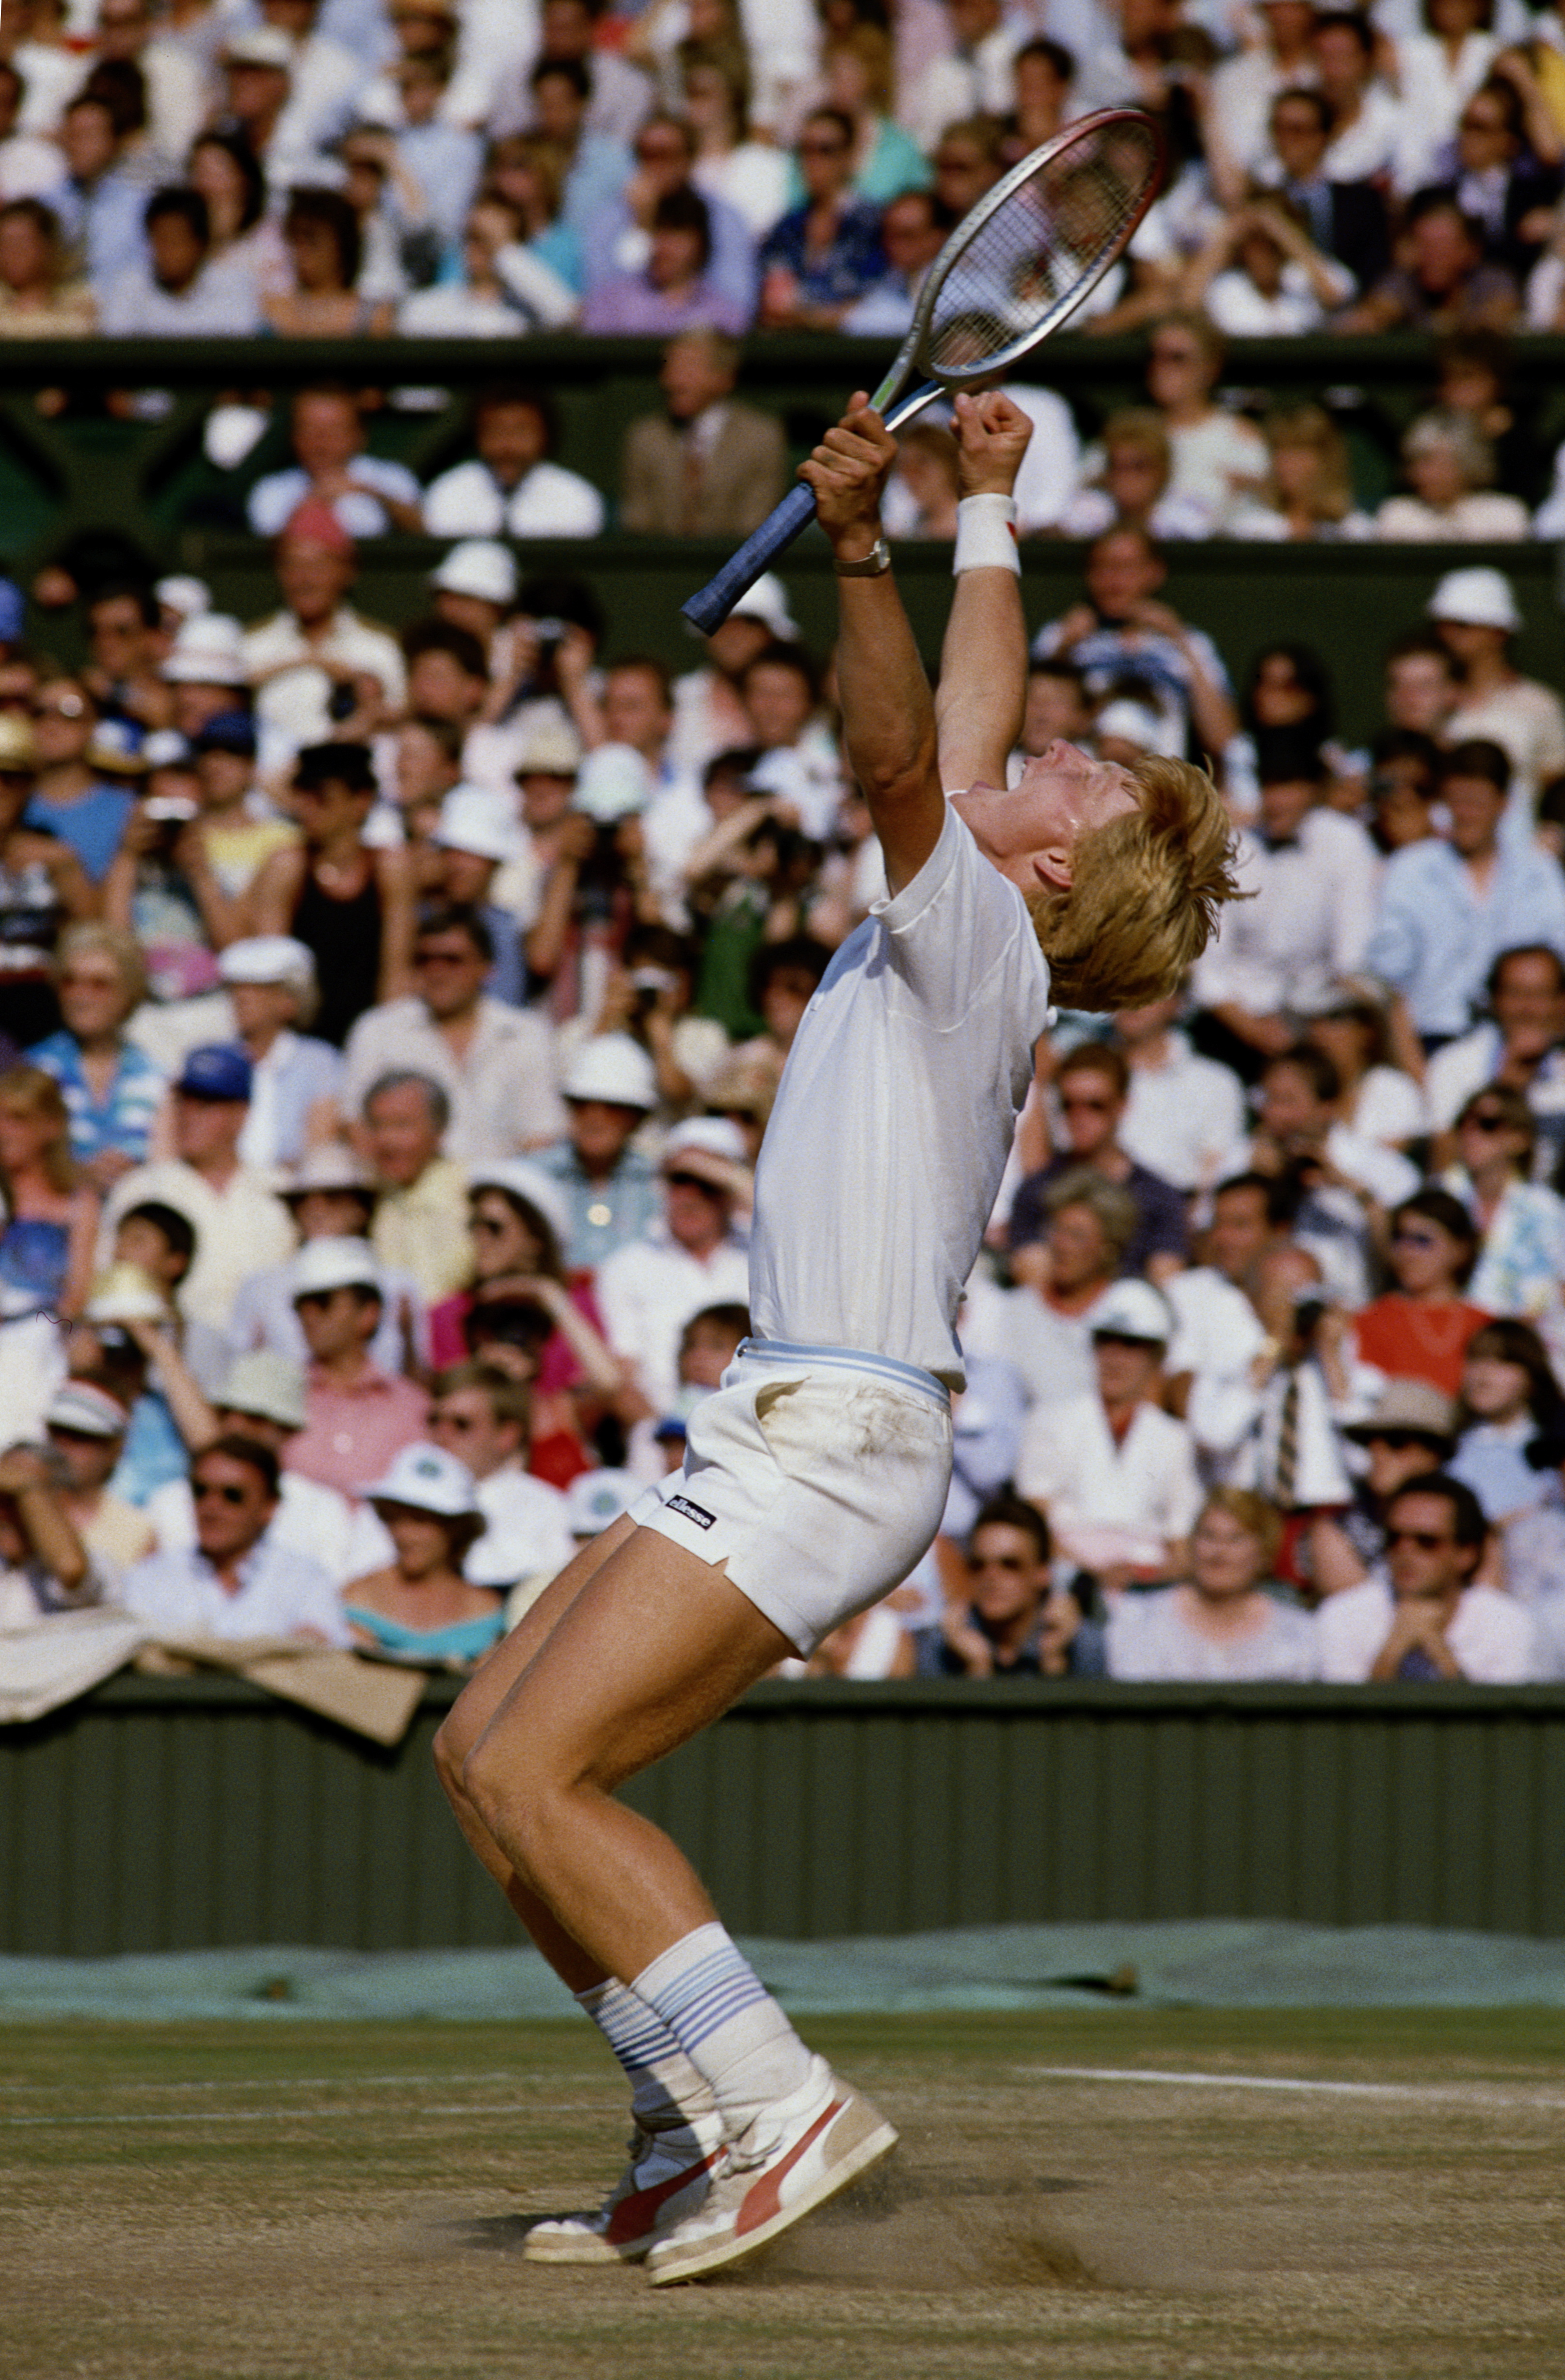 Boris Becker of Germany pumps his arms in the air to celebrate his defeat of Kevin Curren 63, 67 (47), 76 (73), 64 during the Men's Singles final of the Wimbledon Lawn Tennis Championship on 7th July 1985 at the All England Lawn Tennis and Croquet C